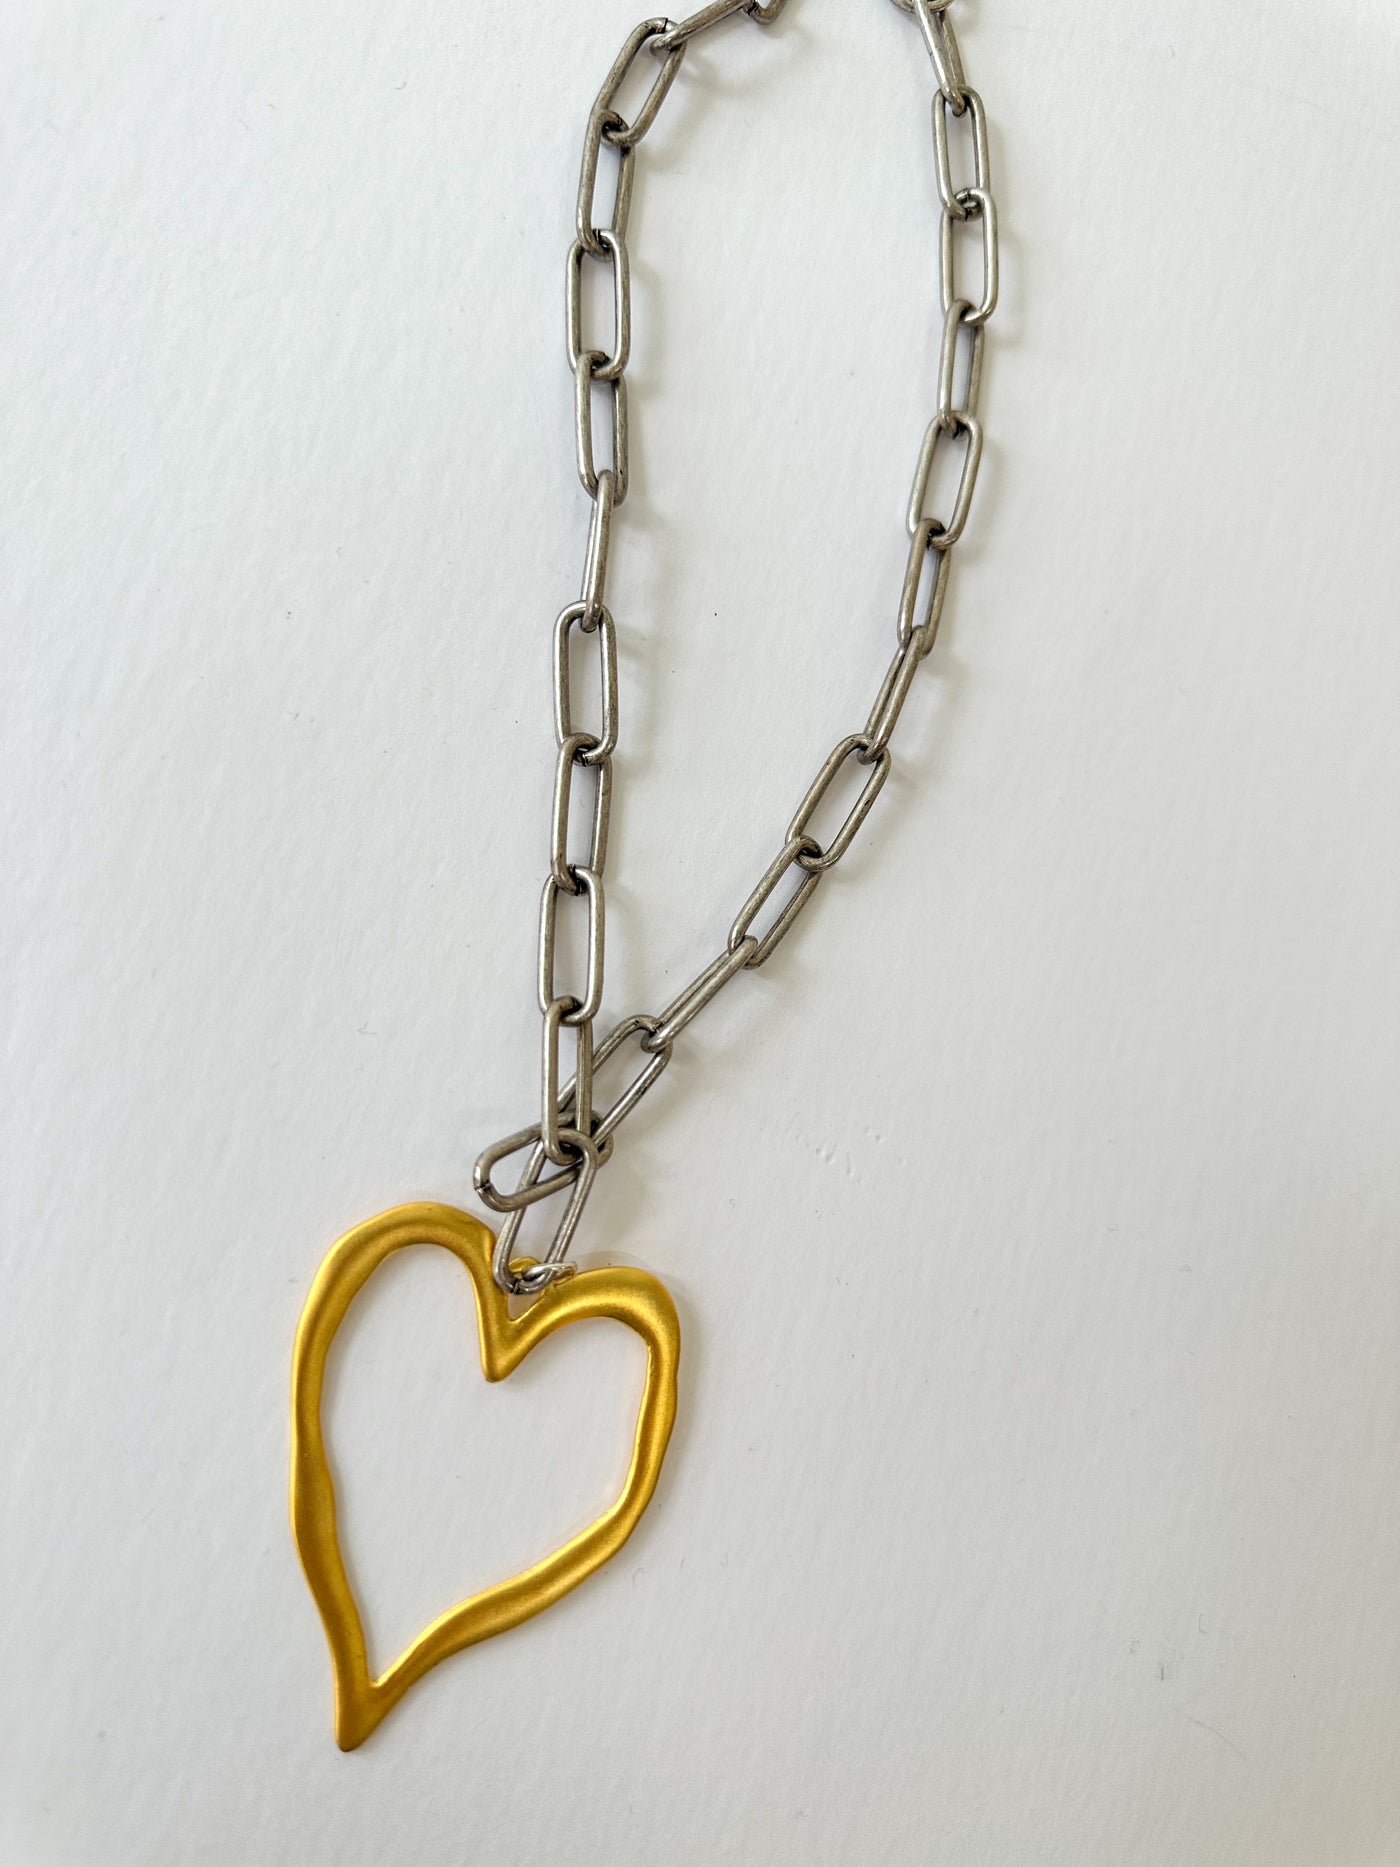 Wear your Heart Necklace